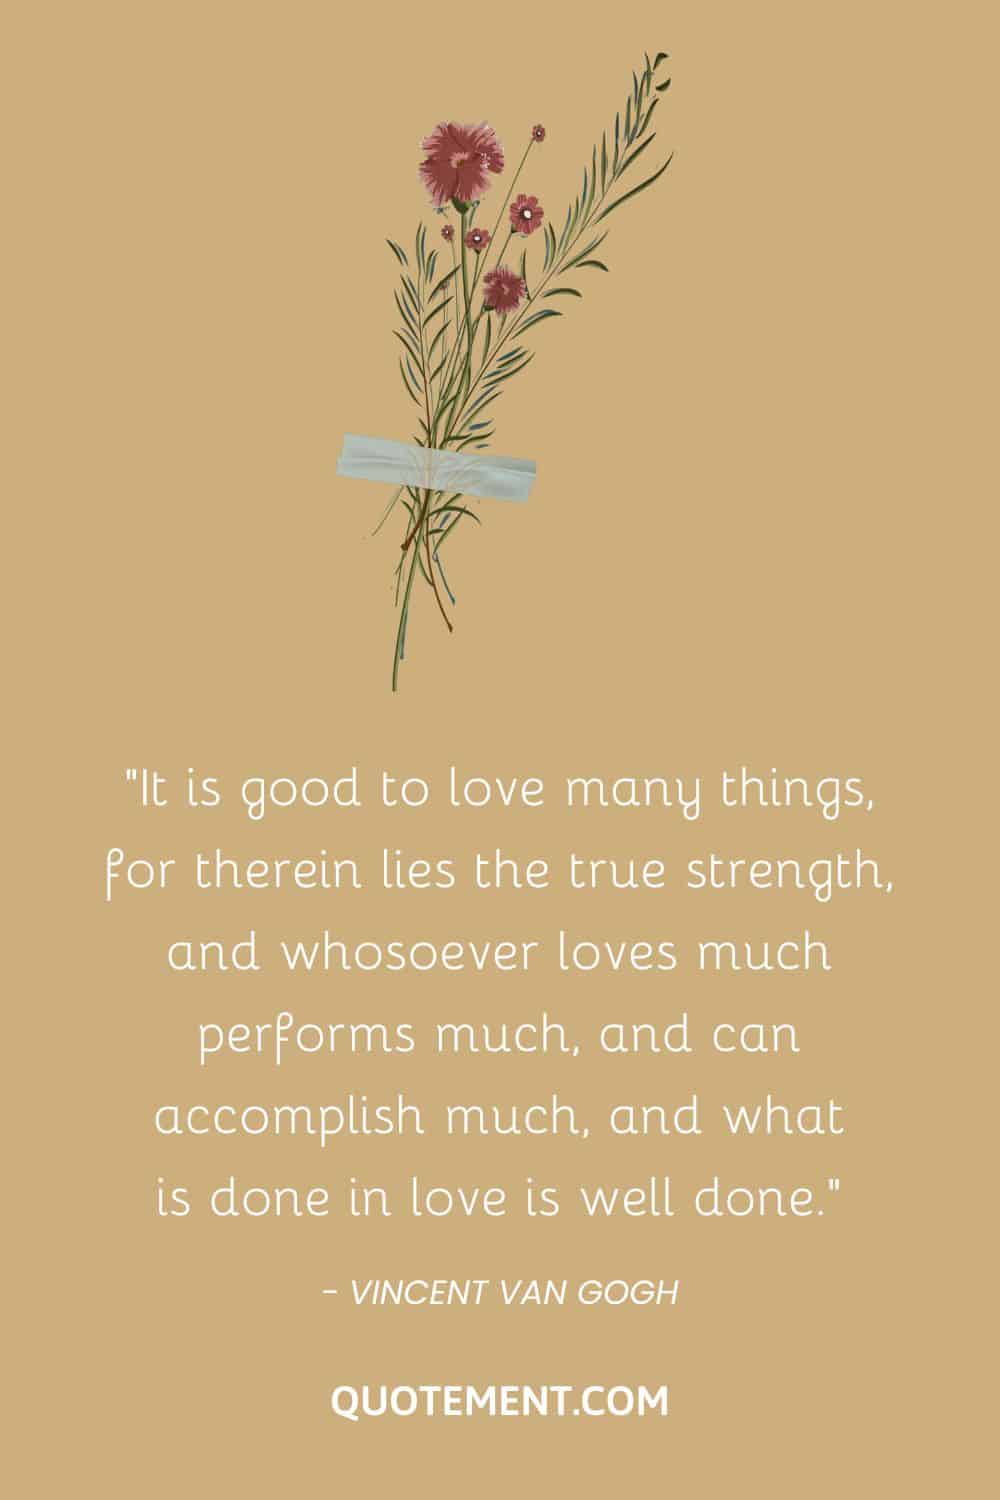 It is good to love many things, for therein lies the true strength